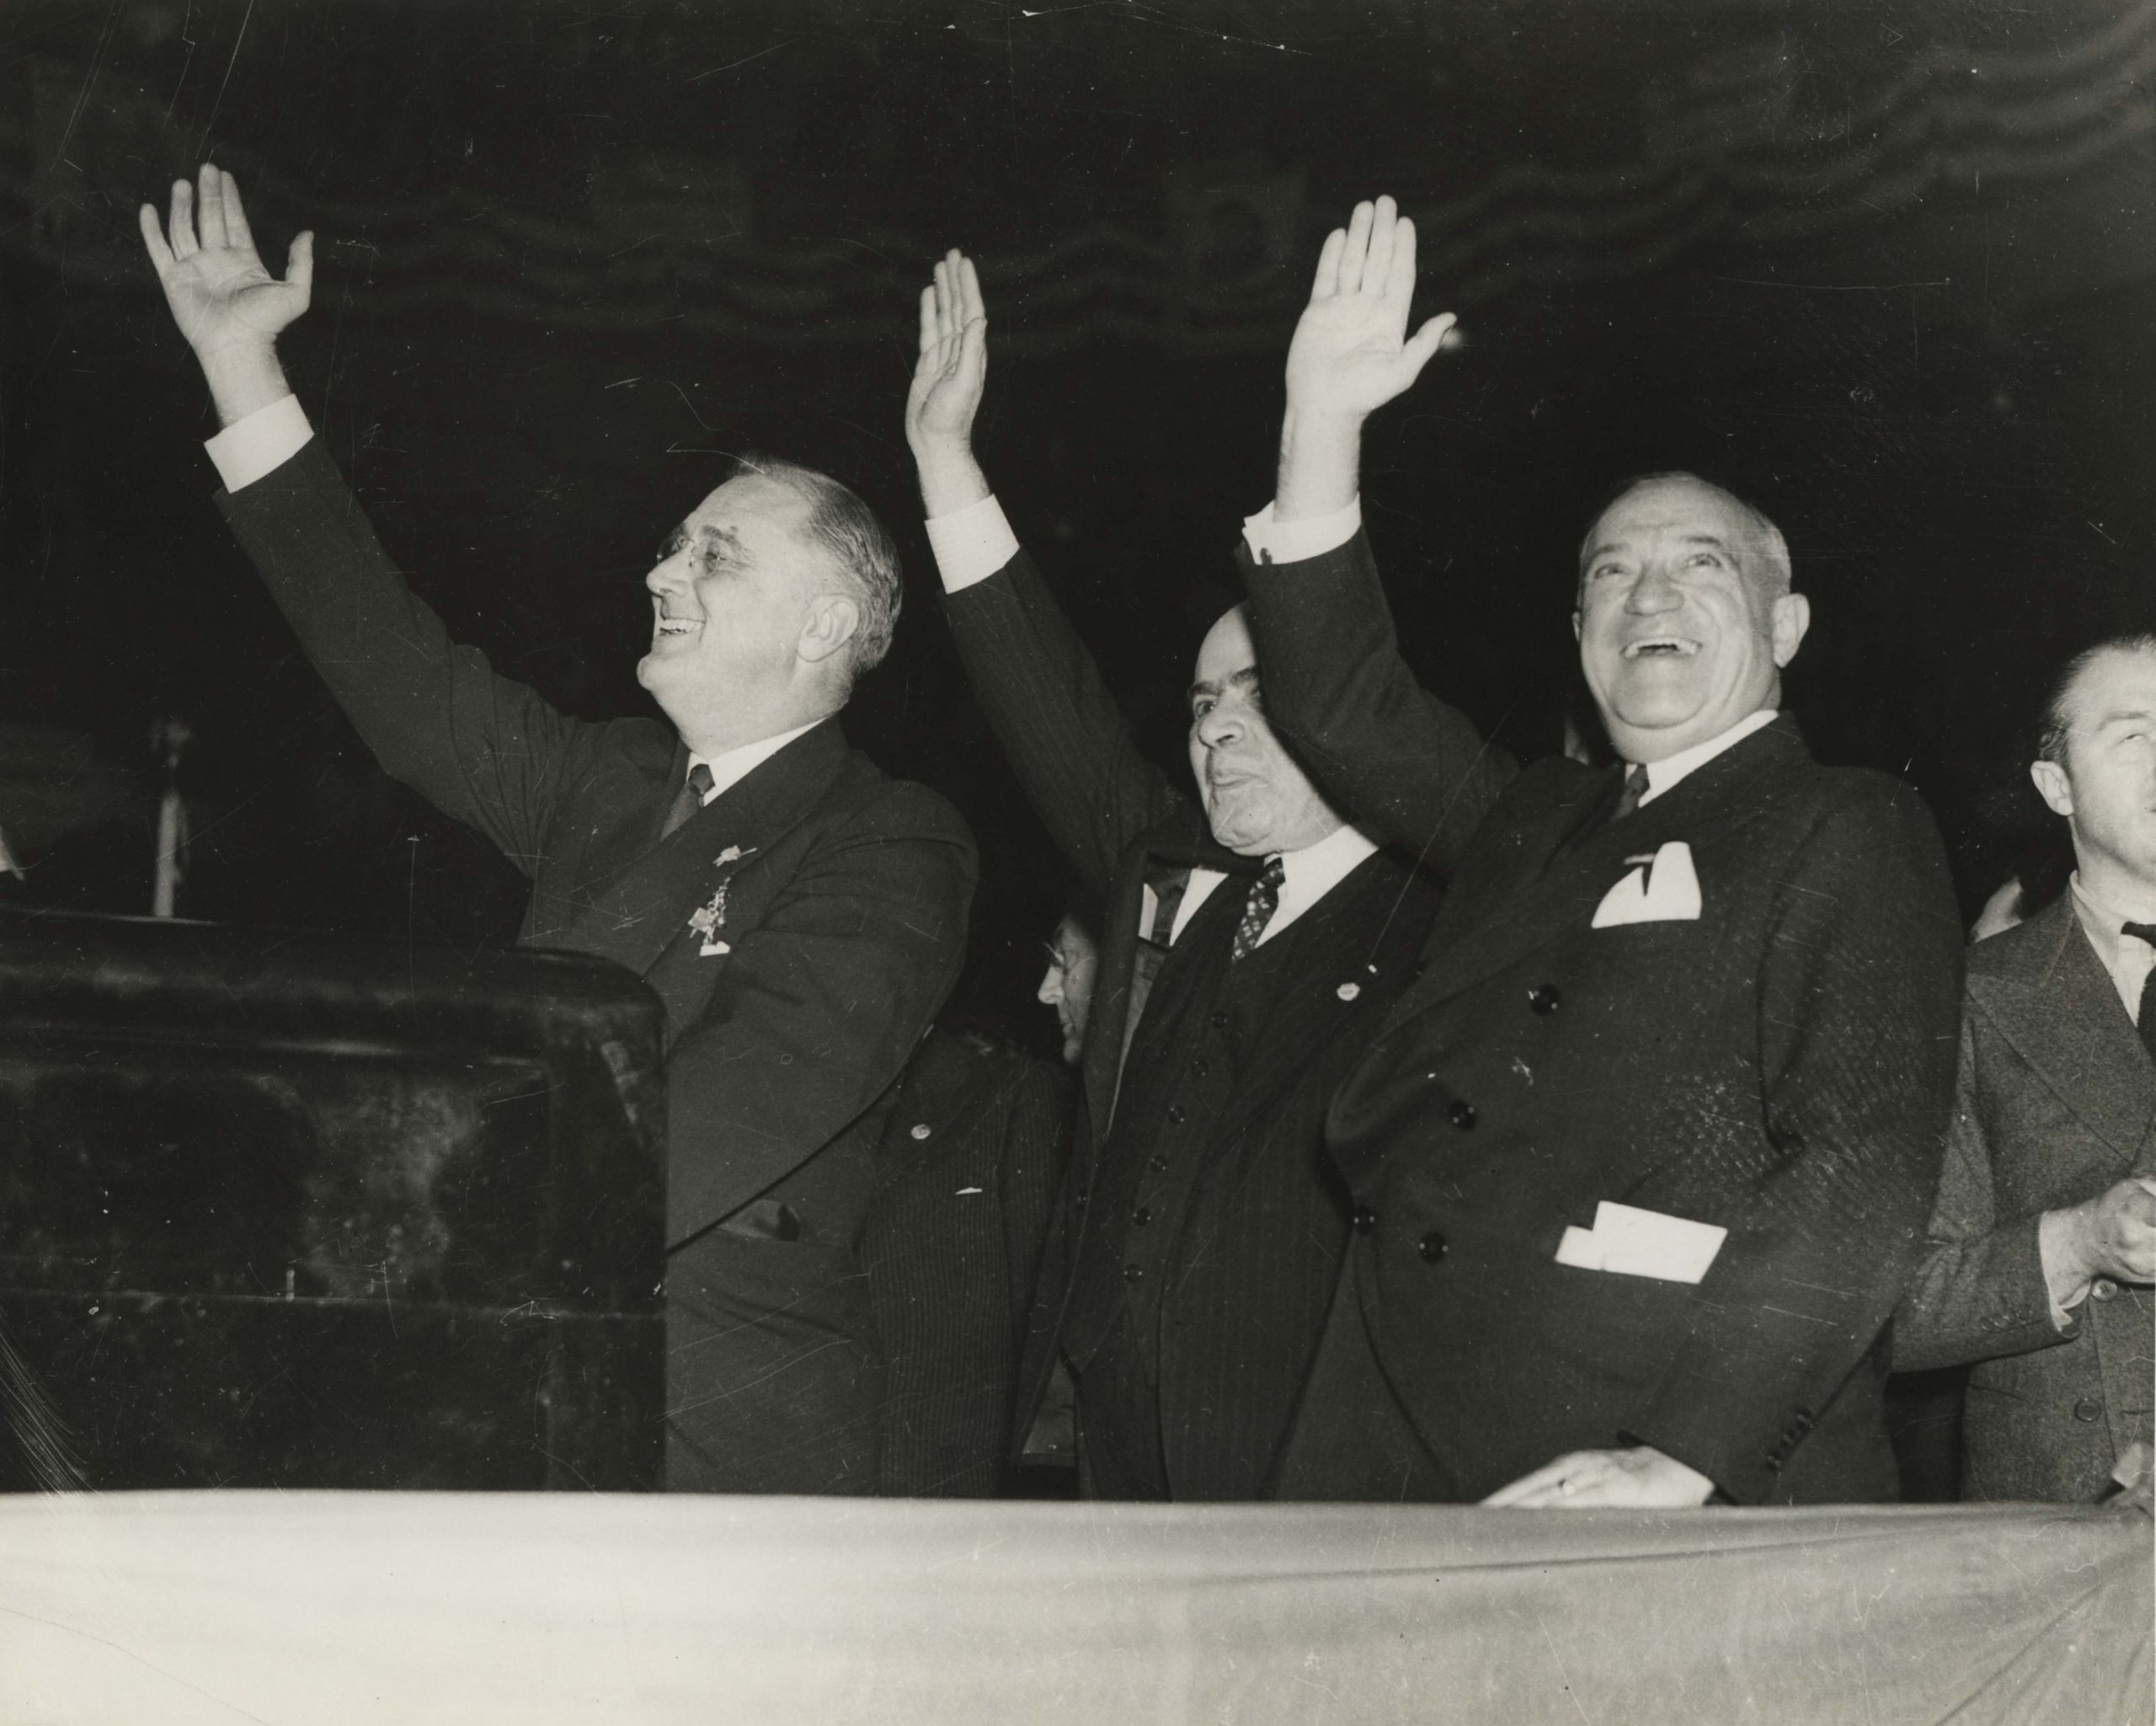 FDR, Herbert Lehman, Robert Wagner at a campaign rally in 1936. From the FDR Library Photo Collection